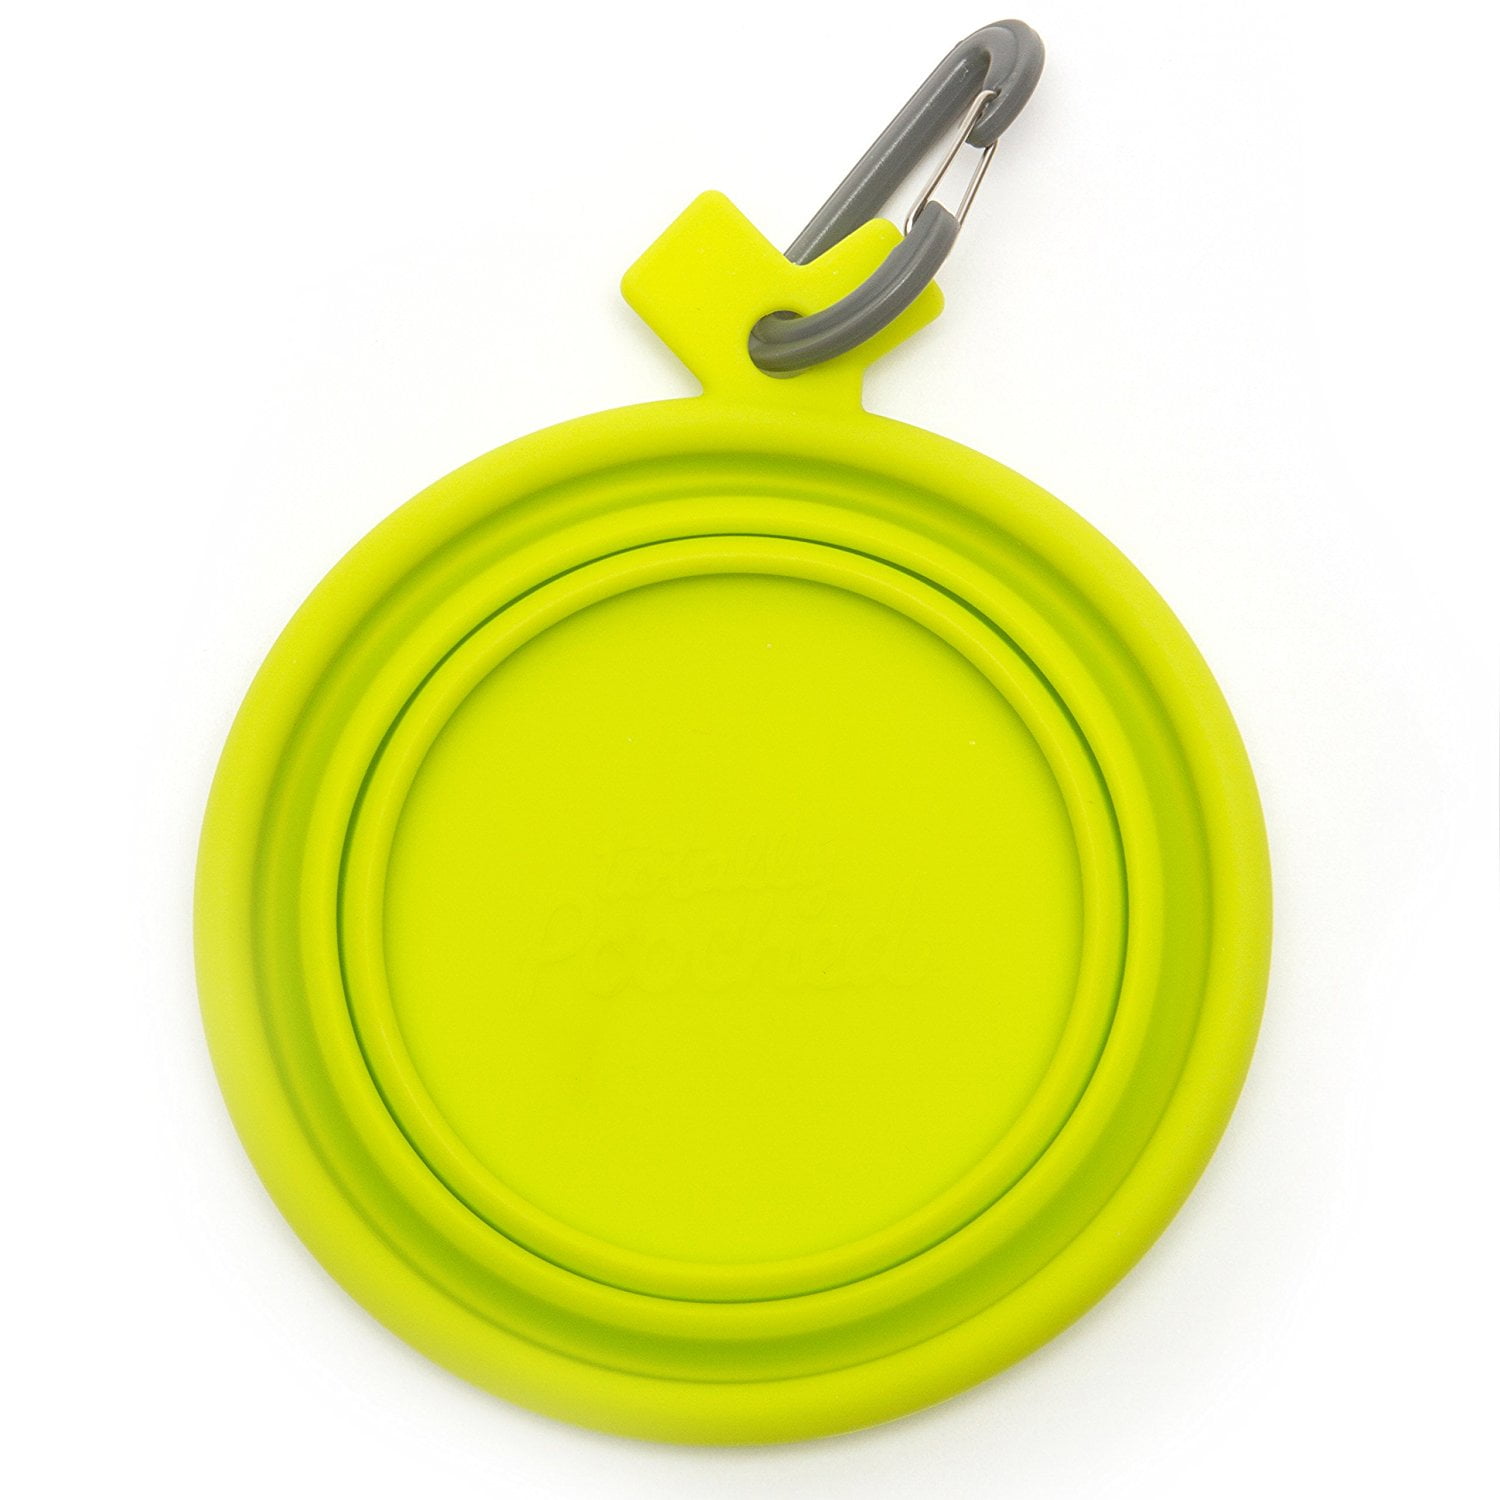 Totally Pooched Non-Slip Silicone Collapsible Bowl